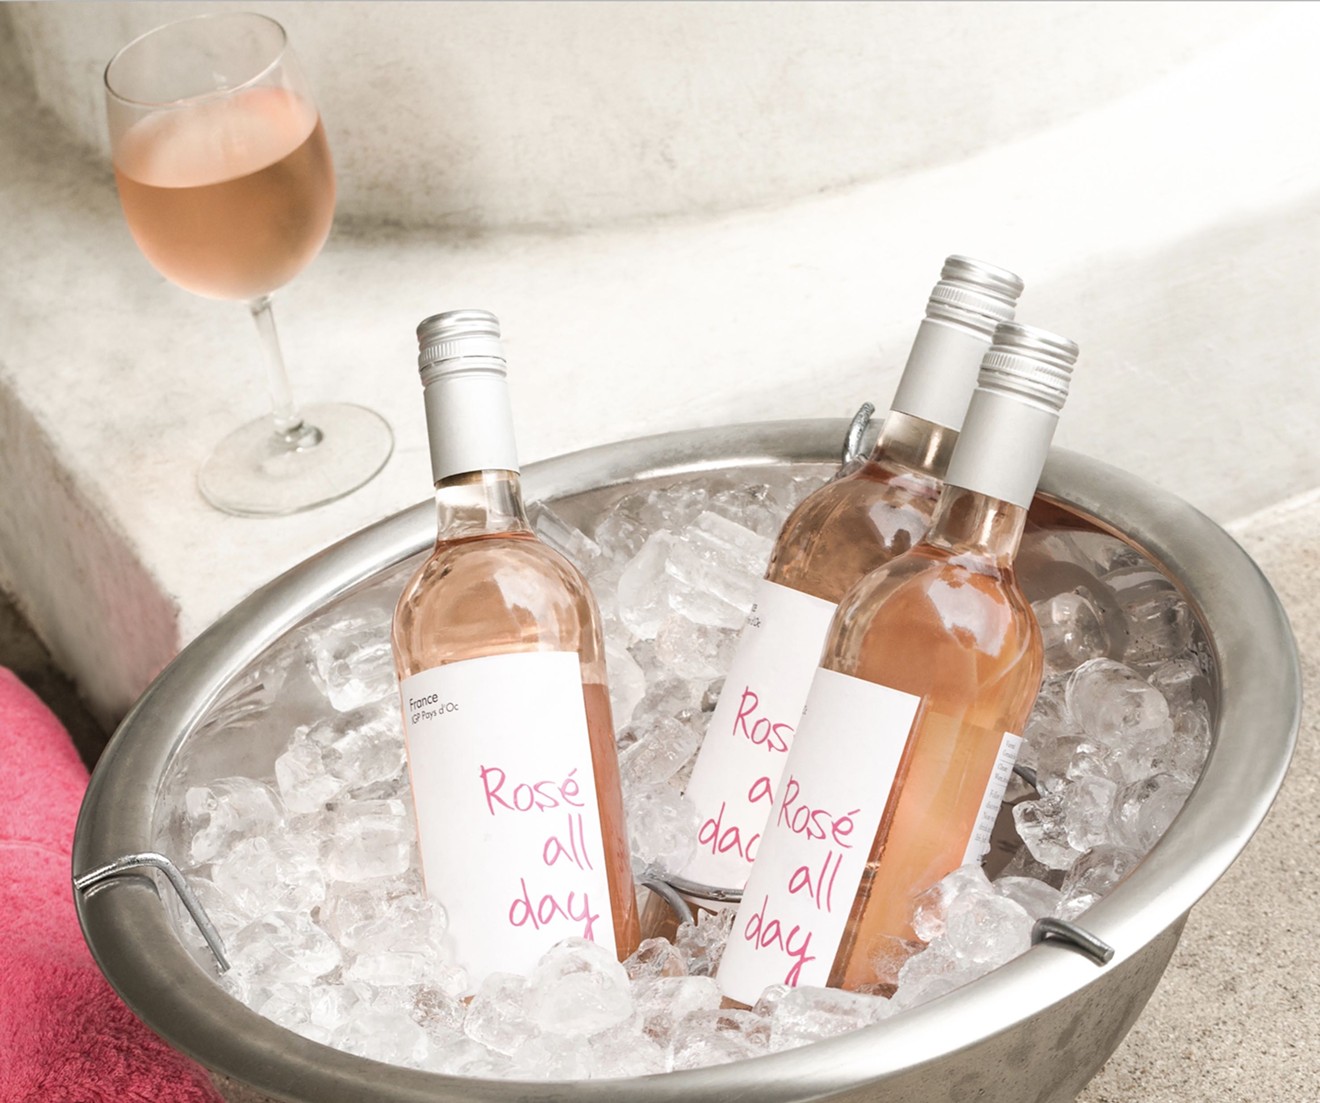 Rosé all day, anyone?